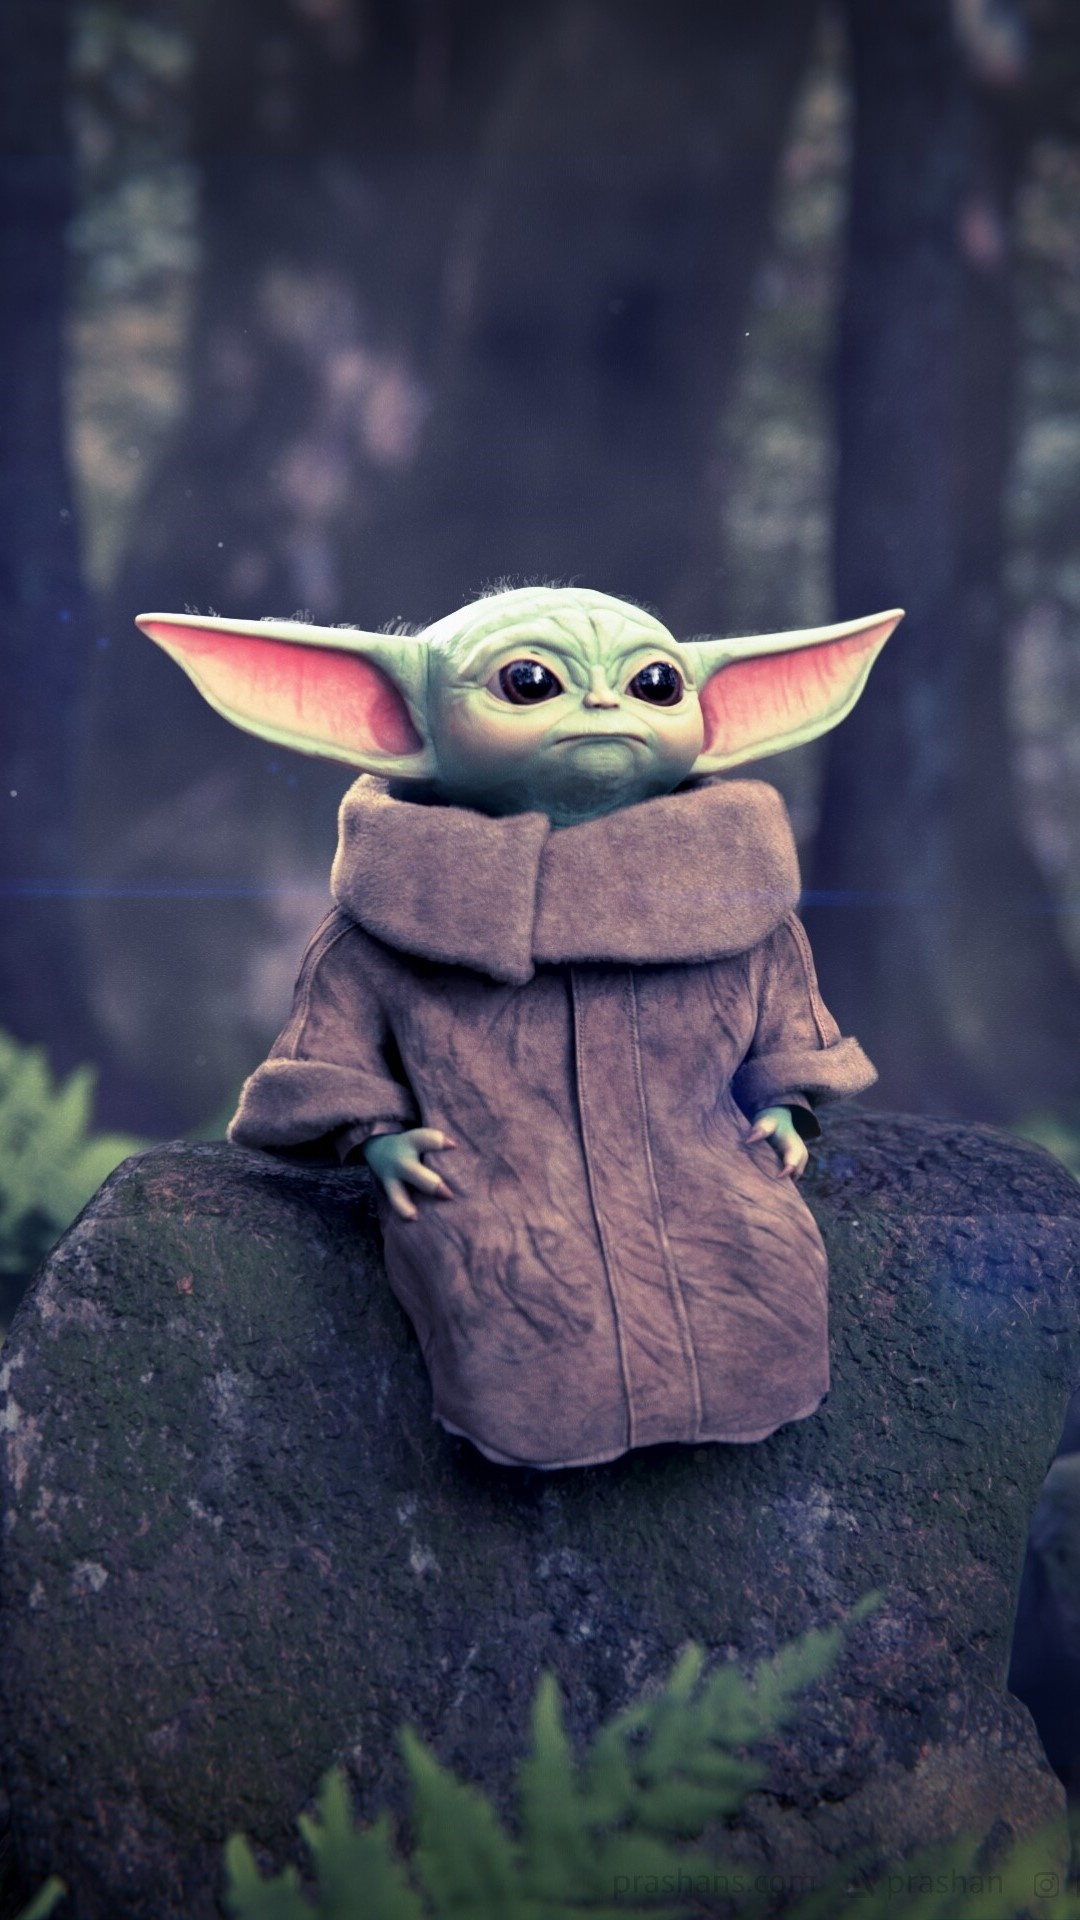 Baby Yoda iPhone wallpaper, Personalized phone background, Film character, Star Wars fan, 1080x1920 Full HD Phone